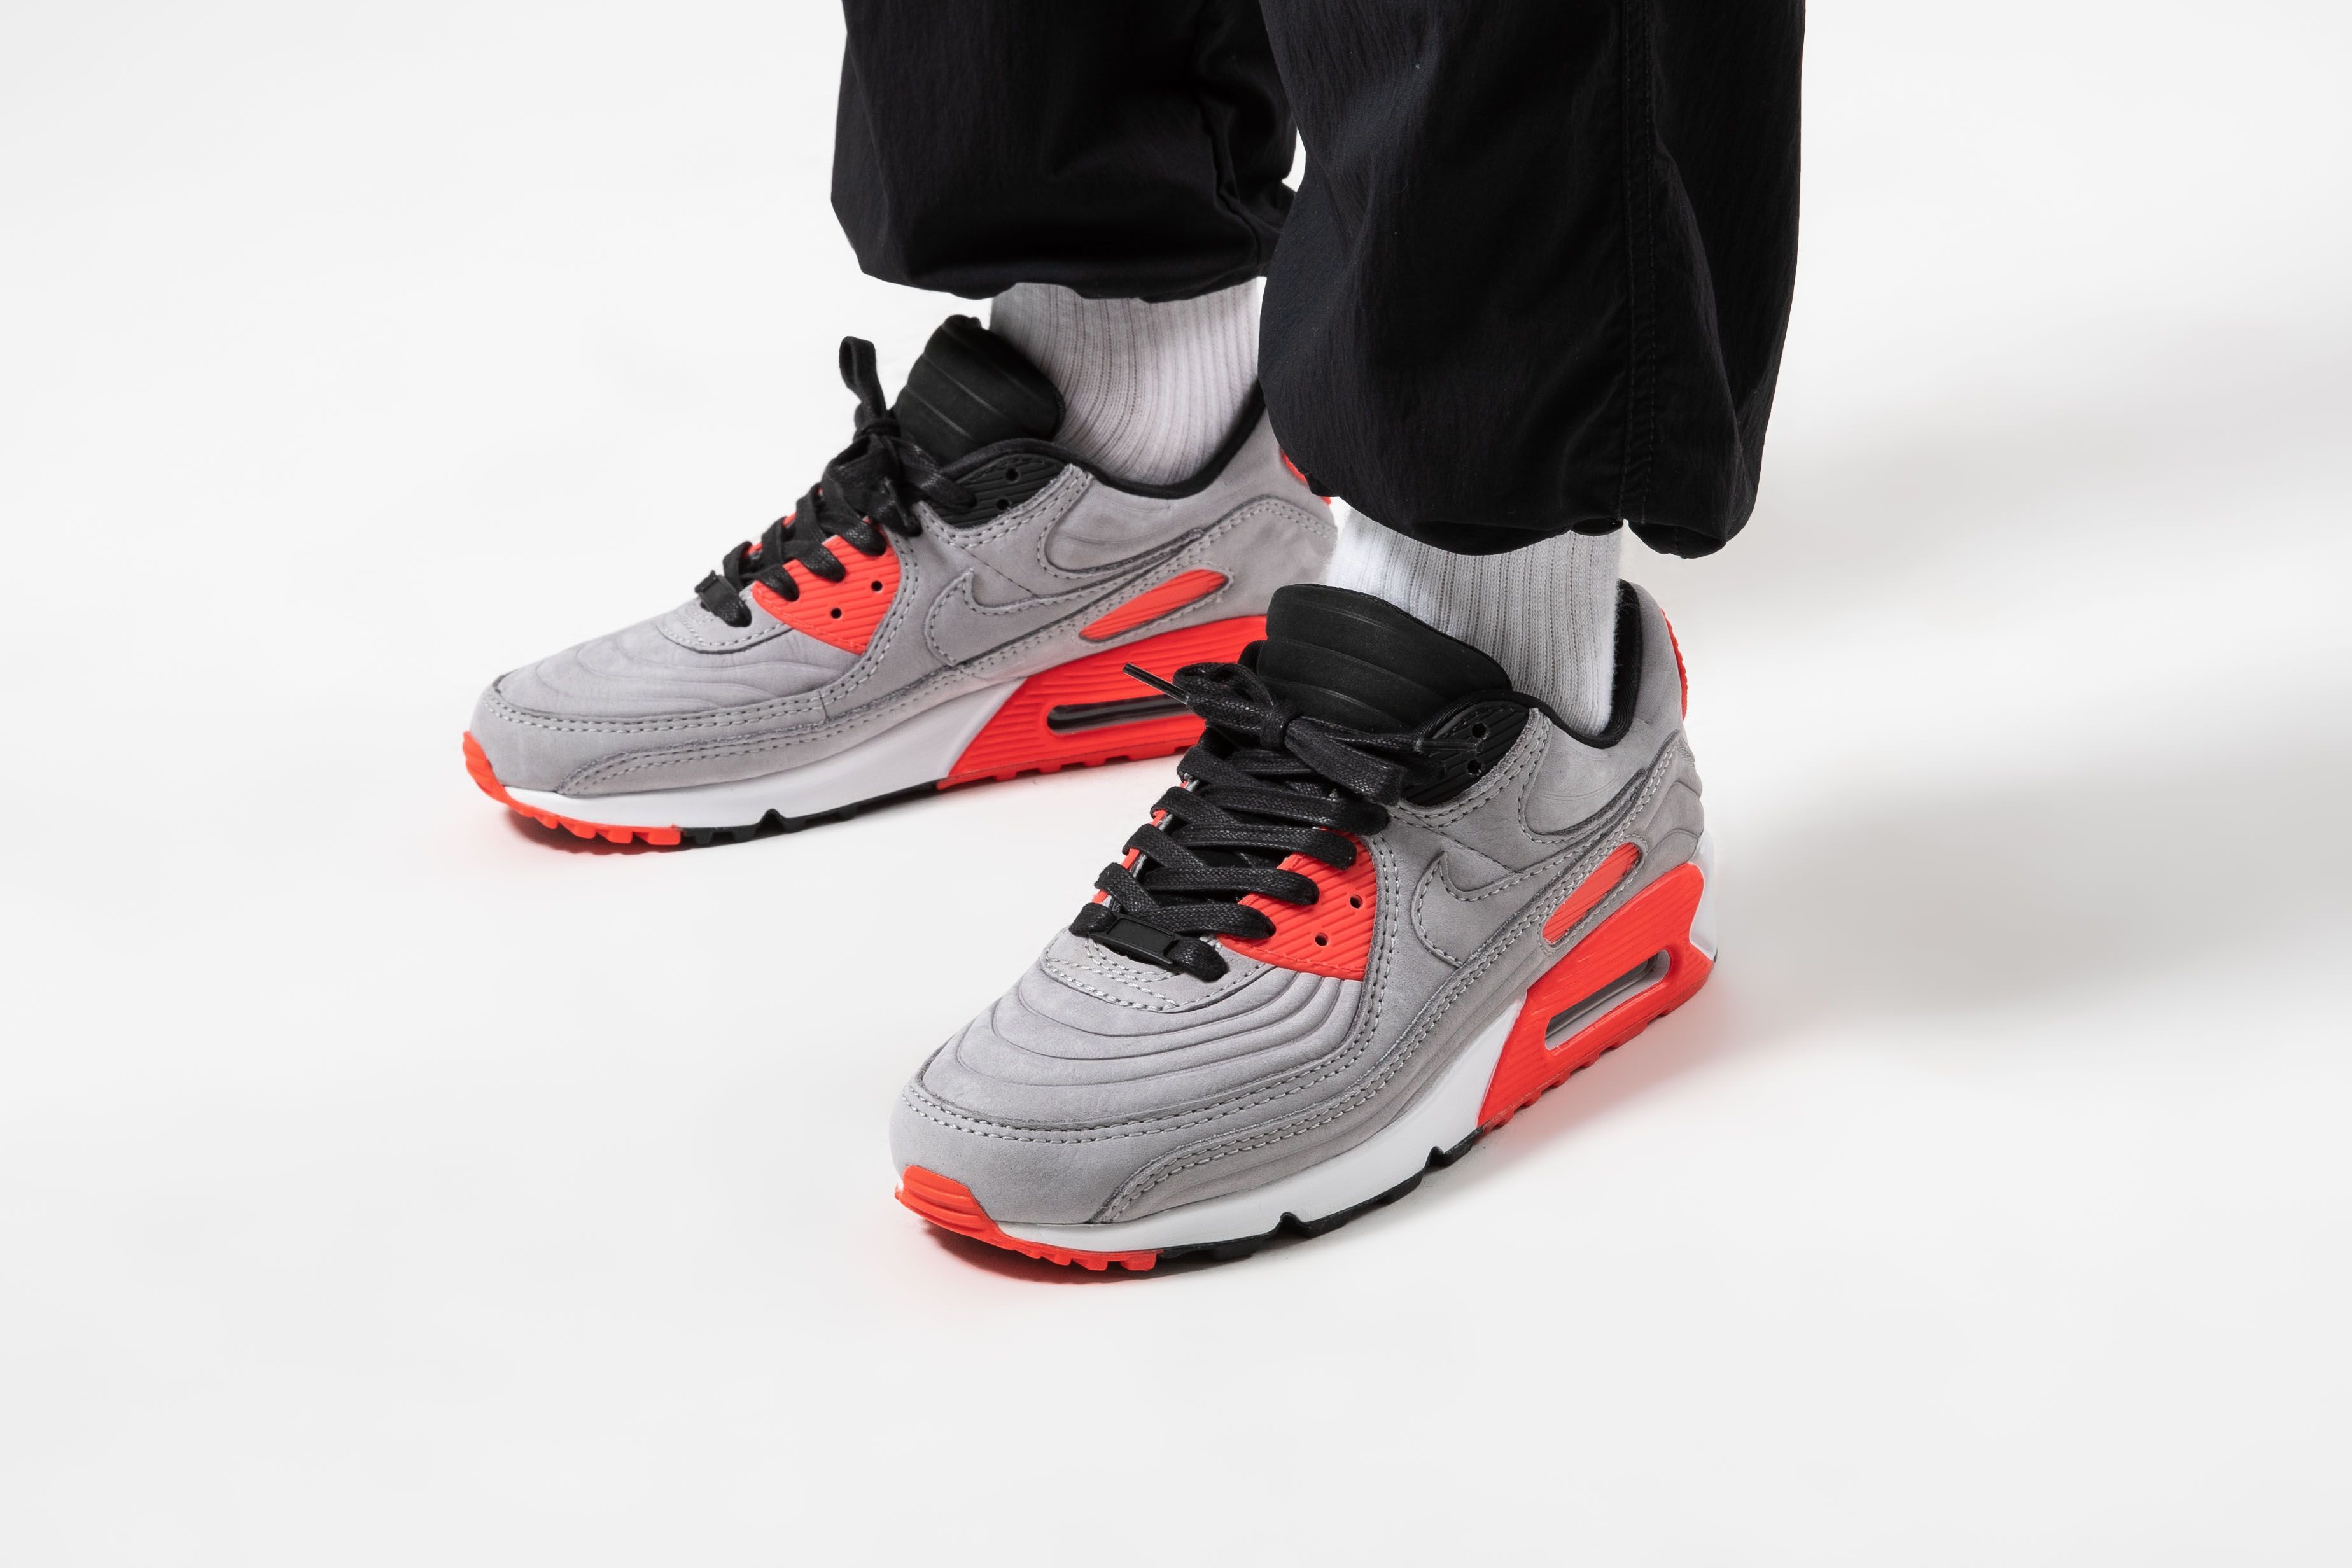 Nauwkeurig Verzoenen Aap Titolo on Twitter: "New. Nike Air Max 90 Quickstrike "Night Silver/Bright  Crimson" now available online. To the webshop ➡️ https://t.co/nbhTWK2NcM US  4 (36) - US 13 (47.5) style code 🔎 CZ7656-001 #am90 #